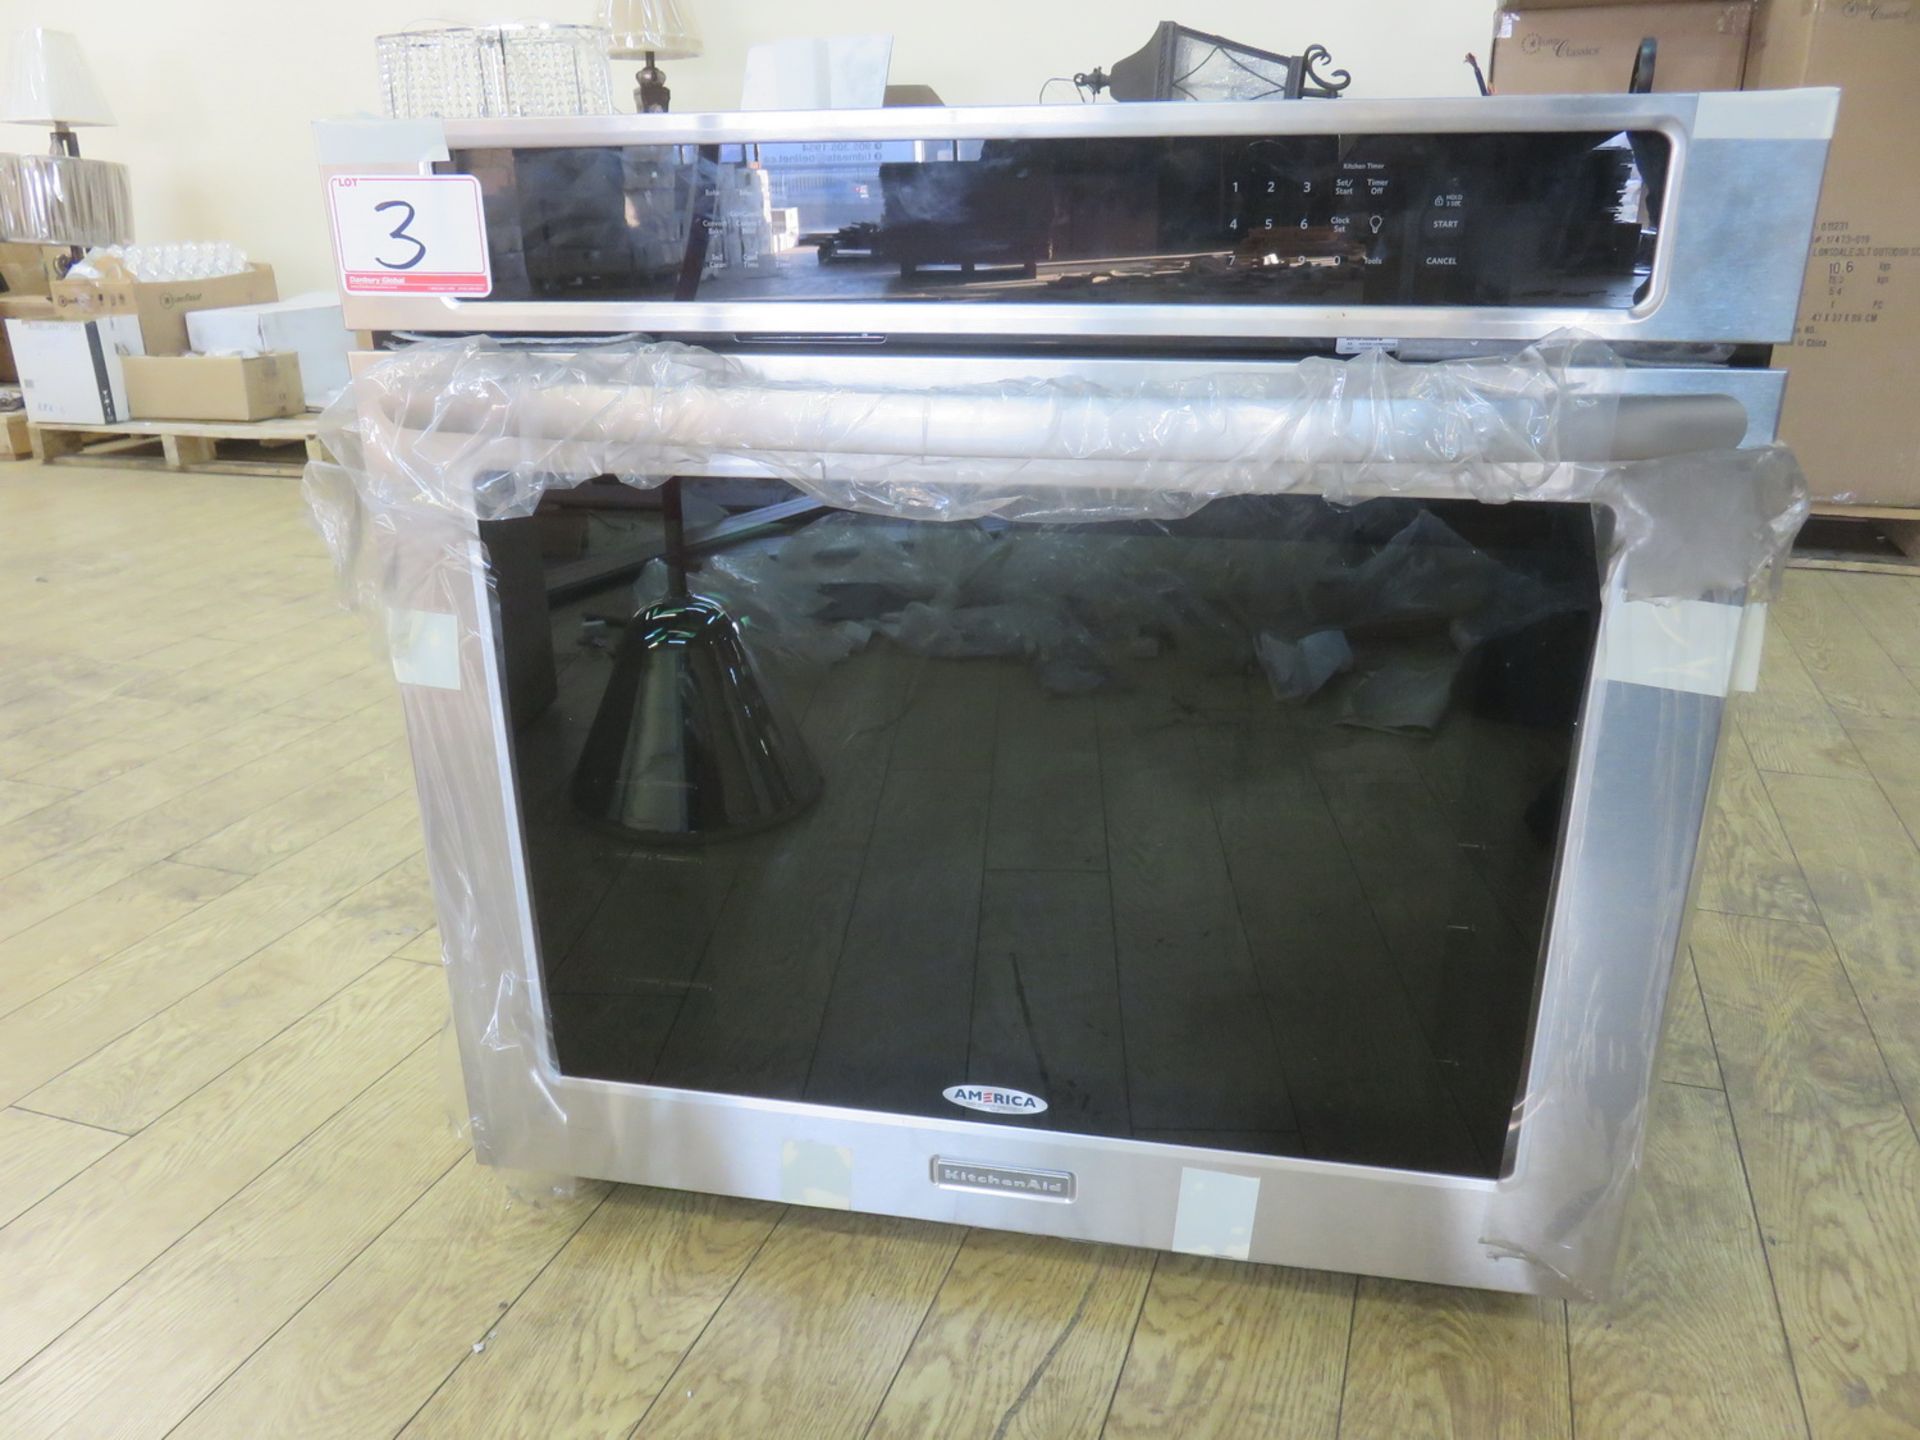 KITCHENAID KEBS109BSS00 STAINLESS STEEL 30" ELECTRIC IN-WALL CONVECTION OVEN, S/N D33801357